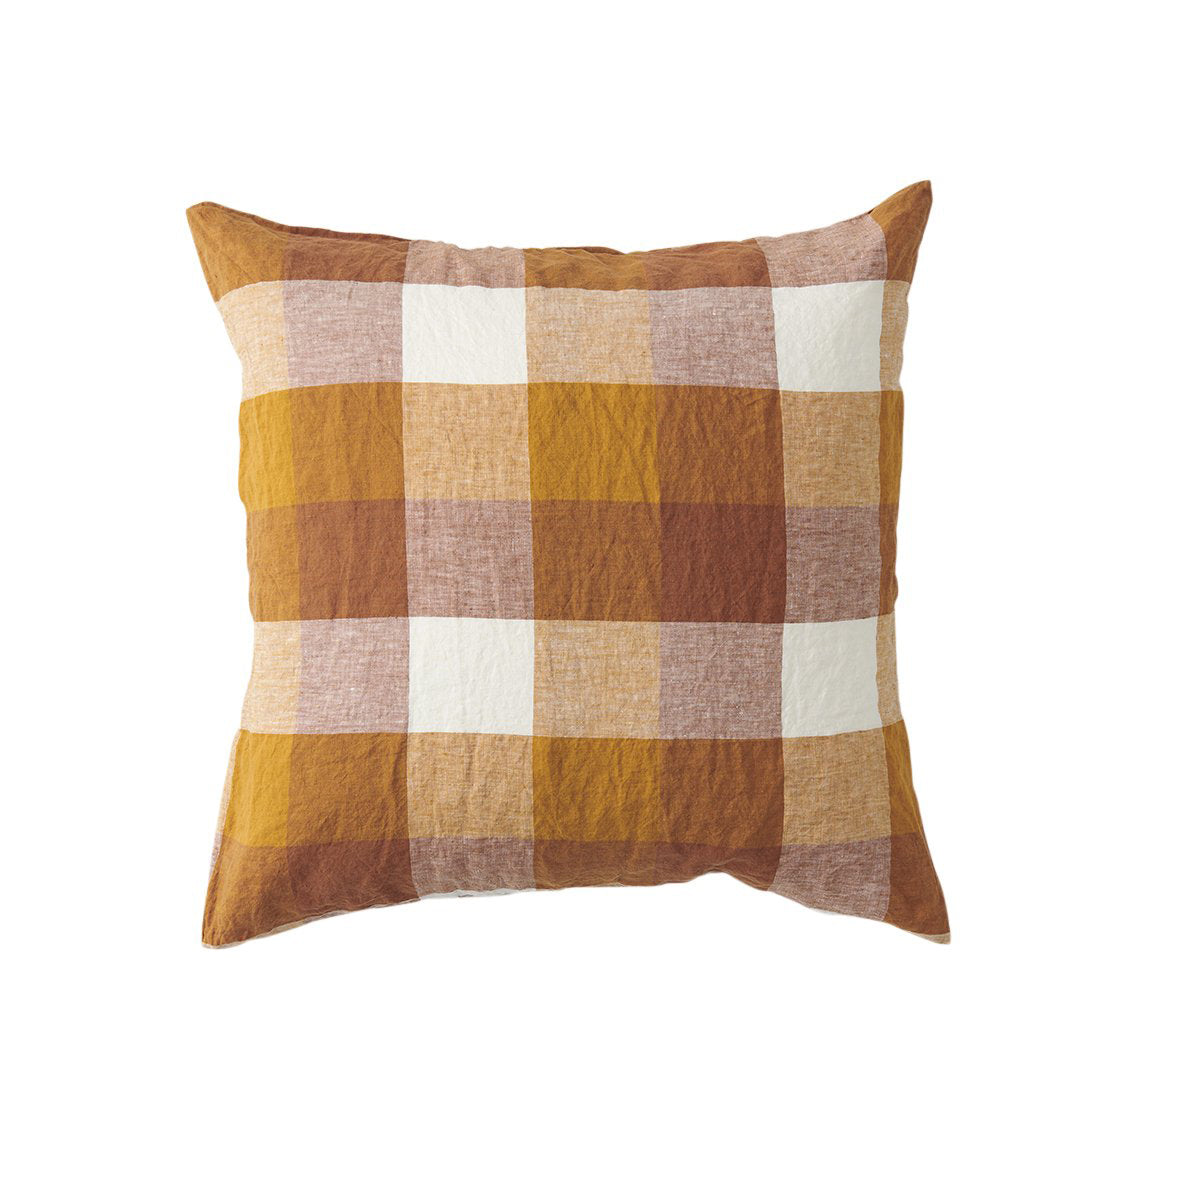 Society of wanderers Biscuit Check Pillowcase Sets